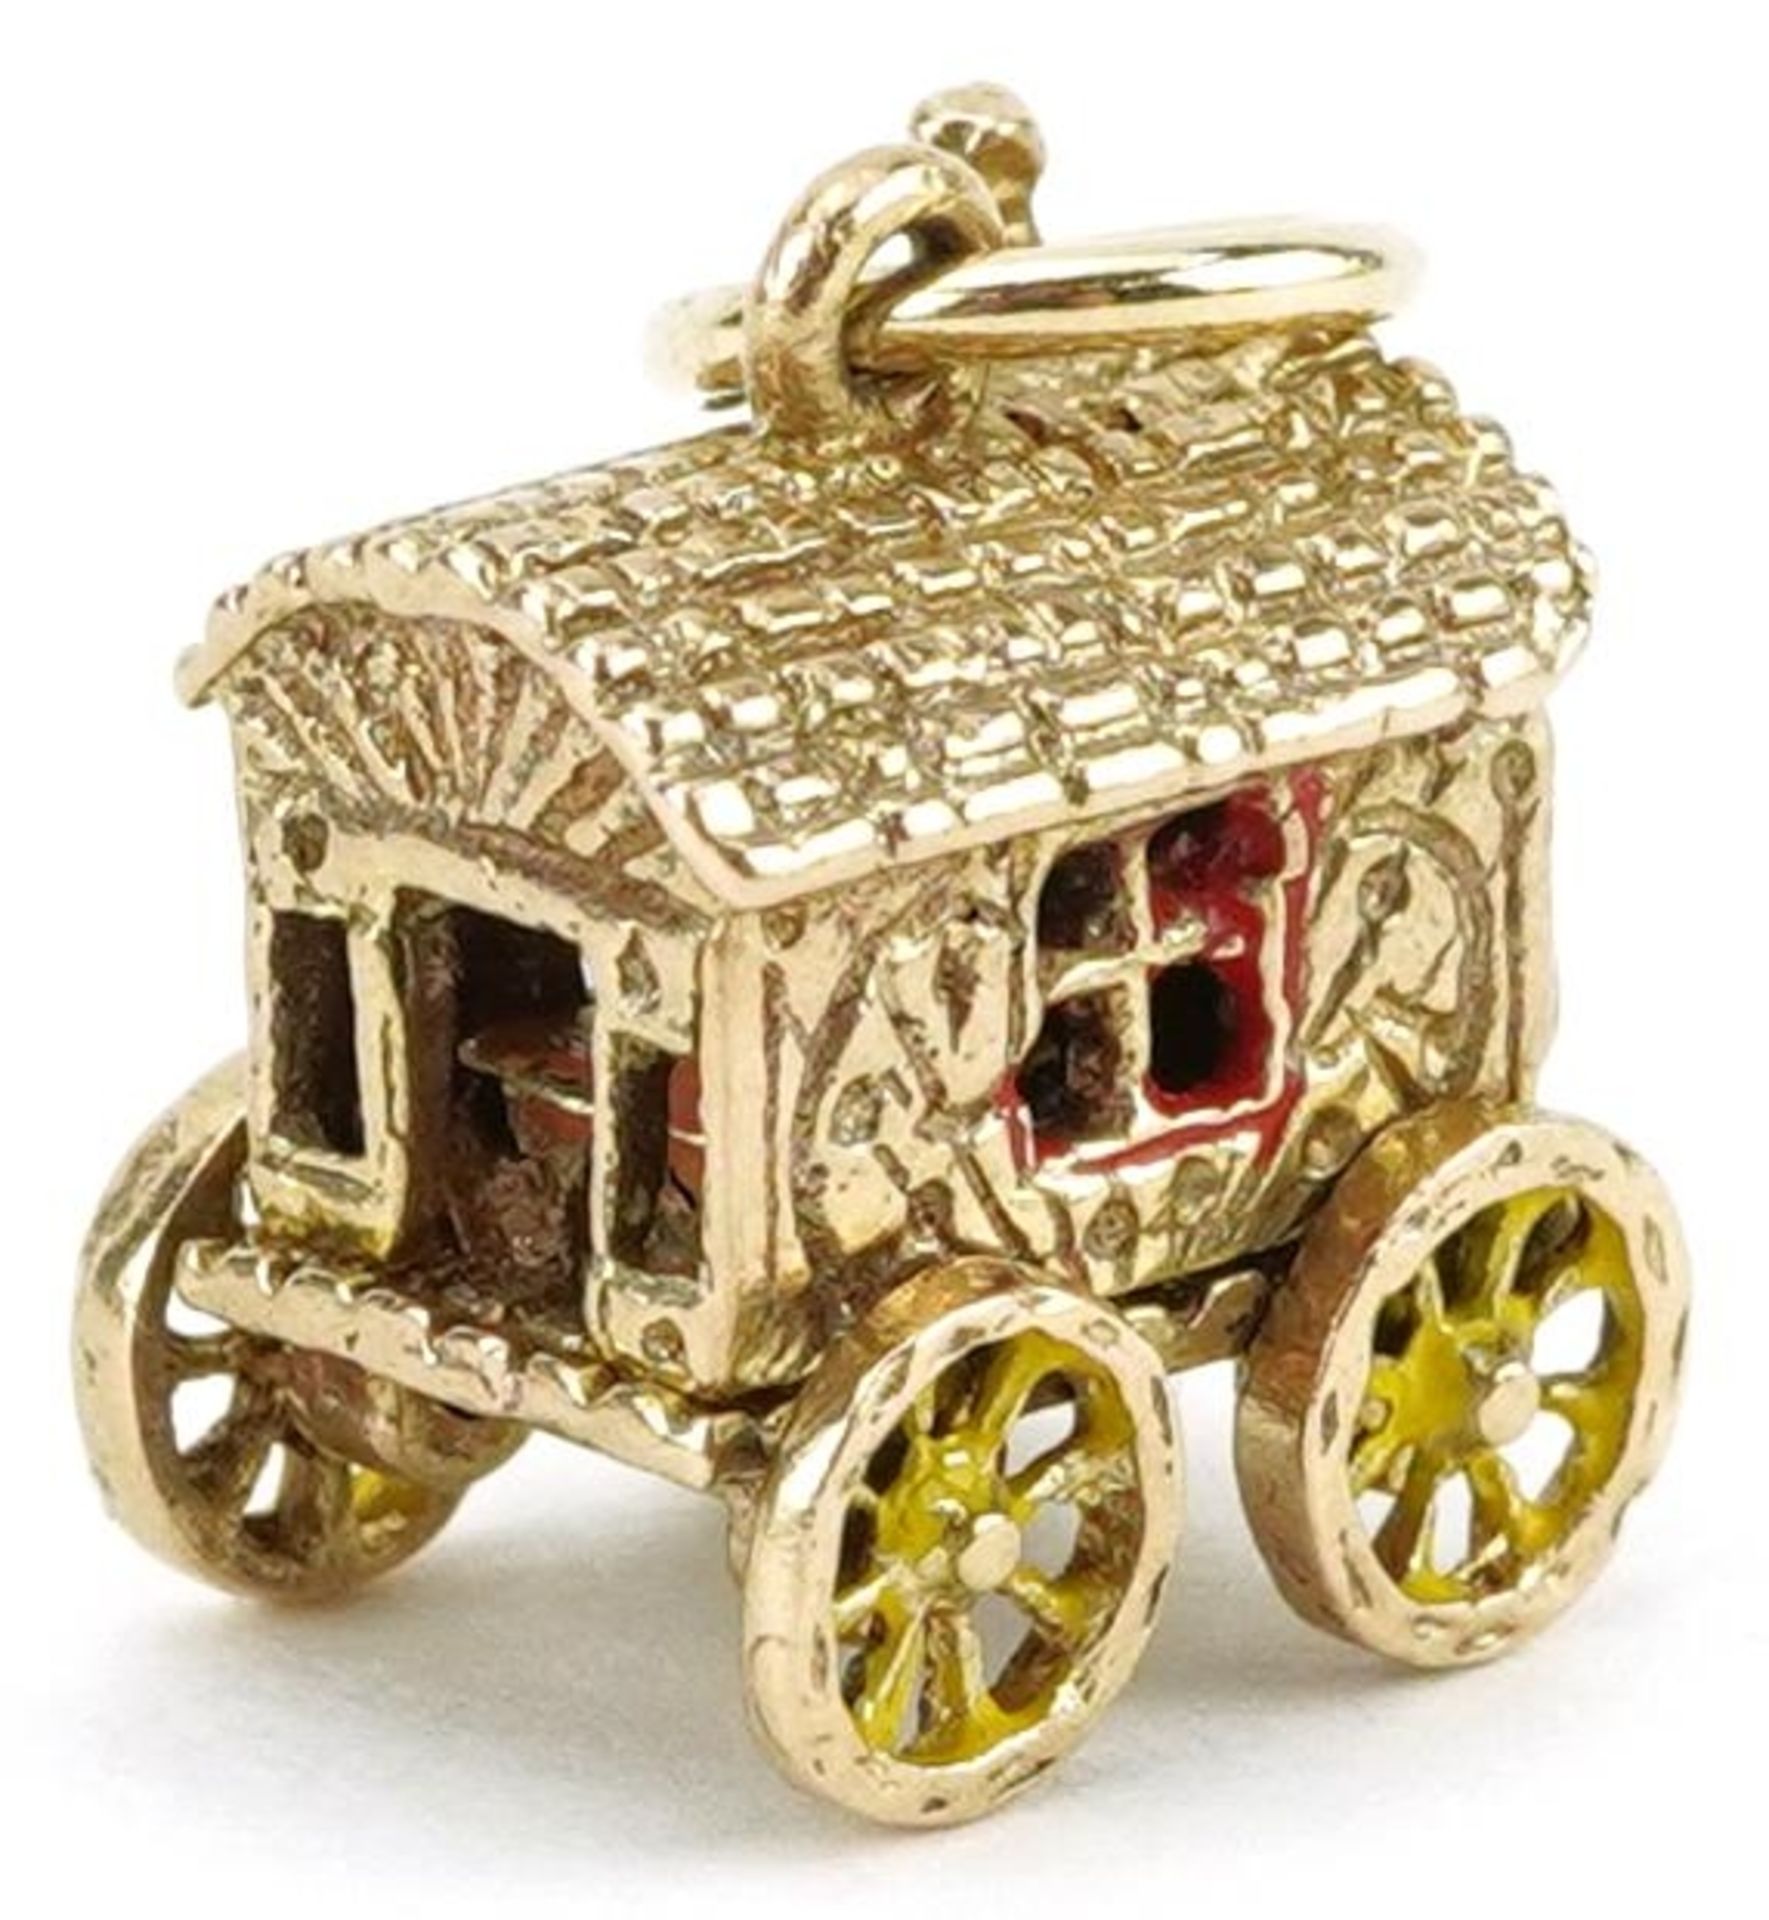 9ct gold and enamel charm in the form of a Gypsy wagon with rotating wheels opening to reveal a - Image 2 of 4